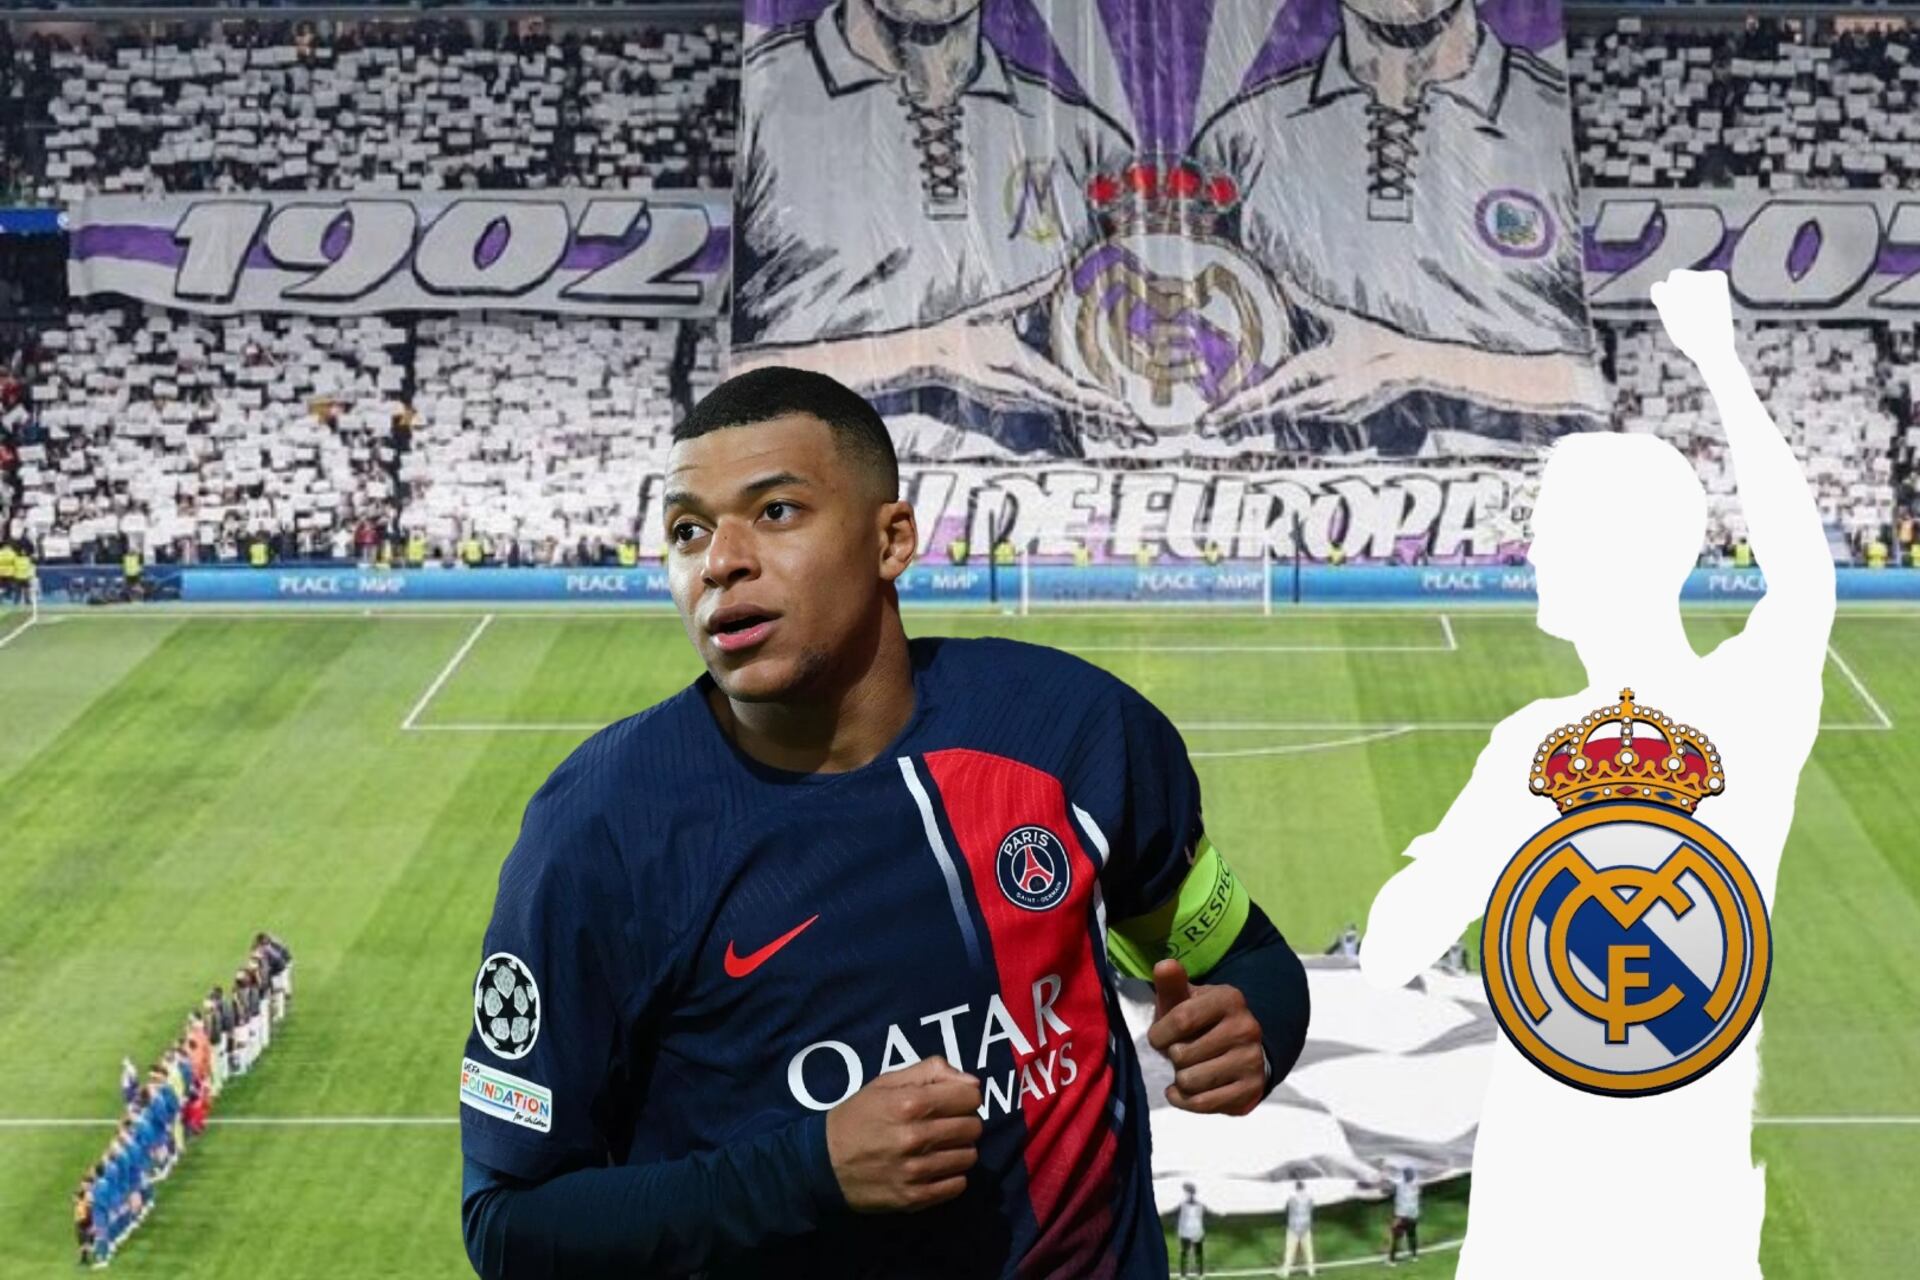 Despite Mbappé arriving to Real Madrid, the player who would stay for only $1.5m after his great performances